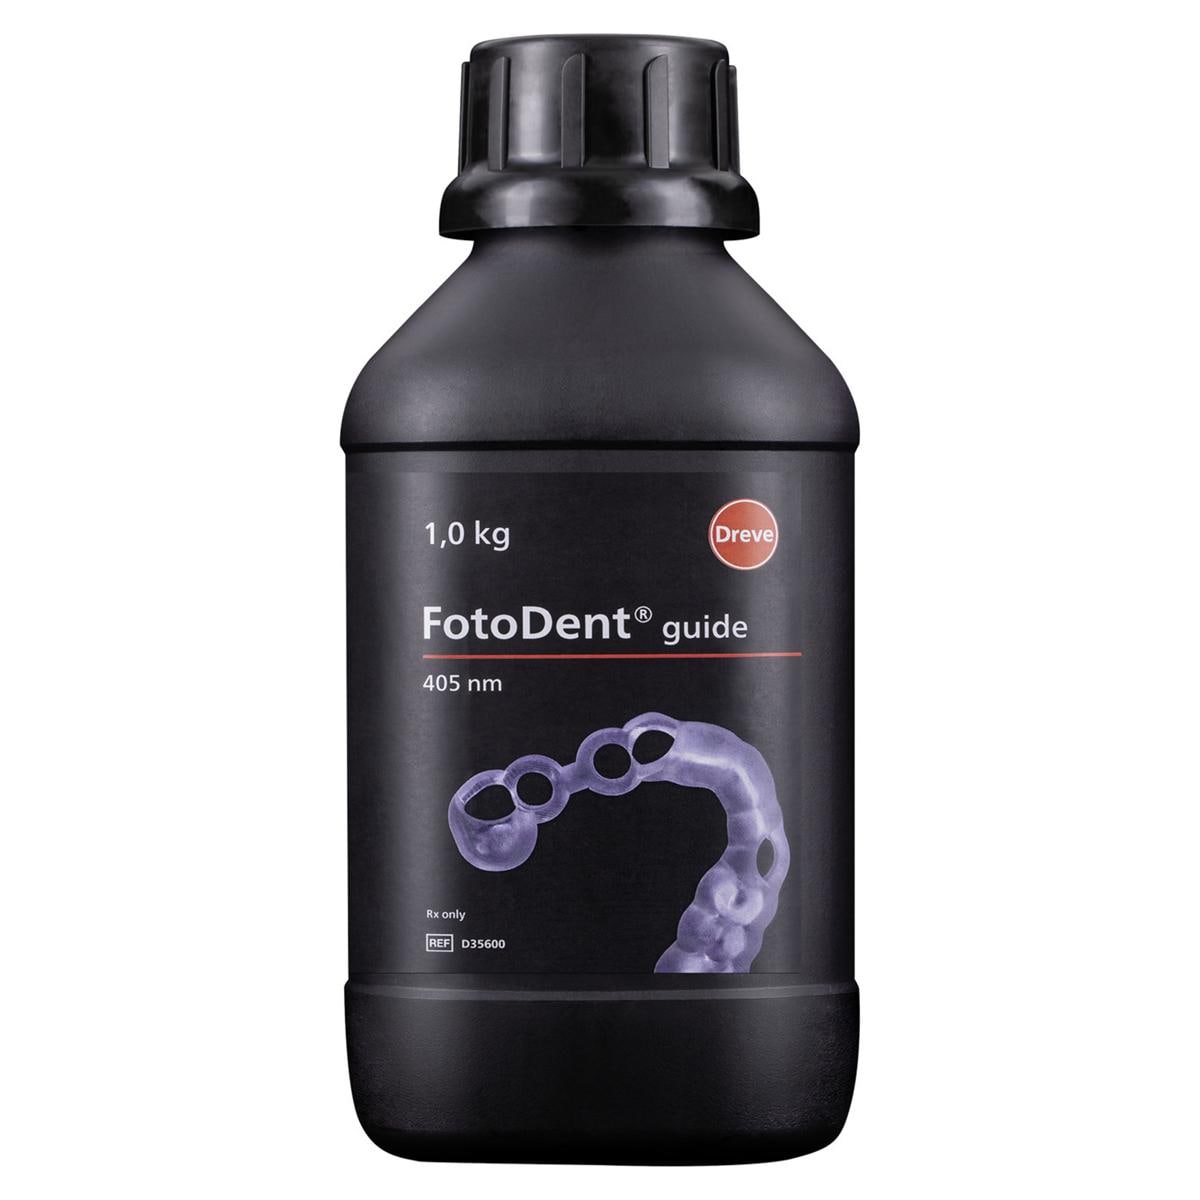 FotoDent® guide 385/405 nm - Flasche 1.000 g, 405 nm